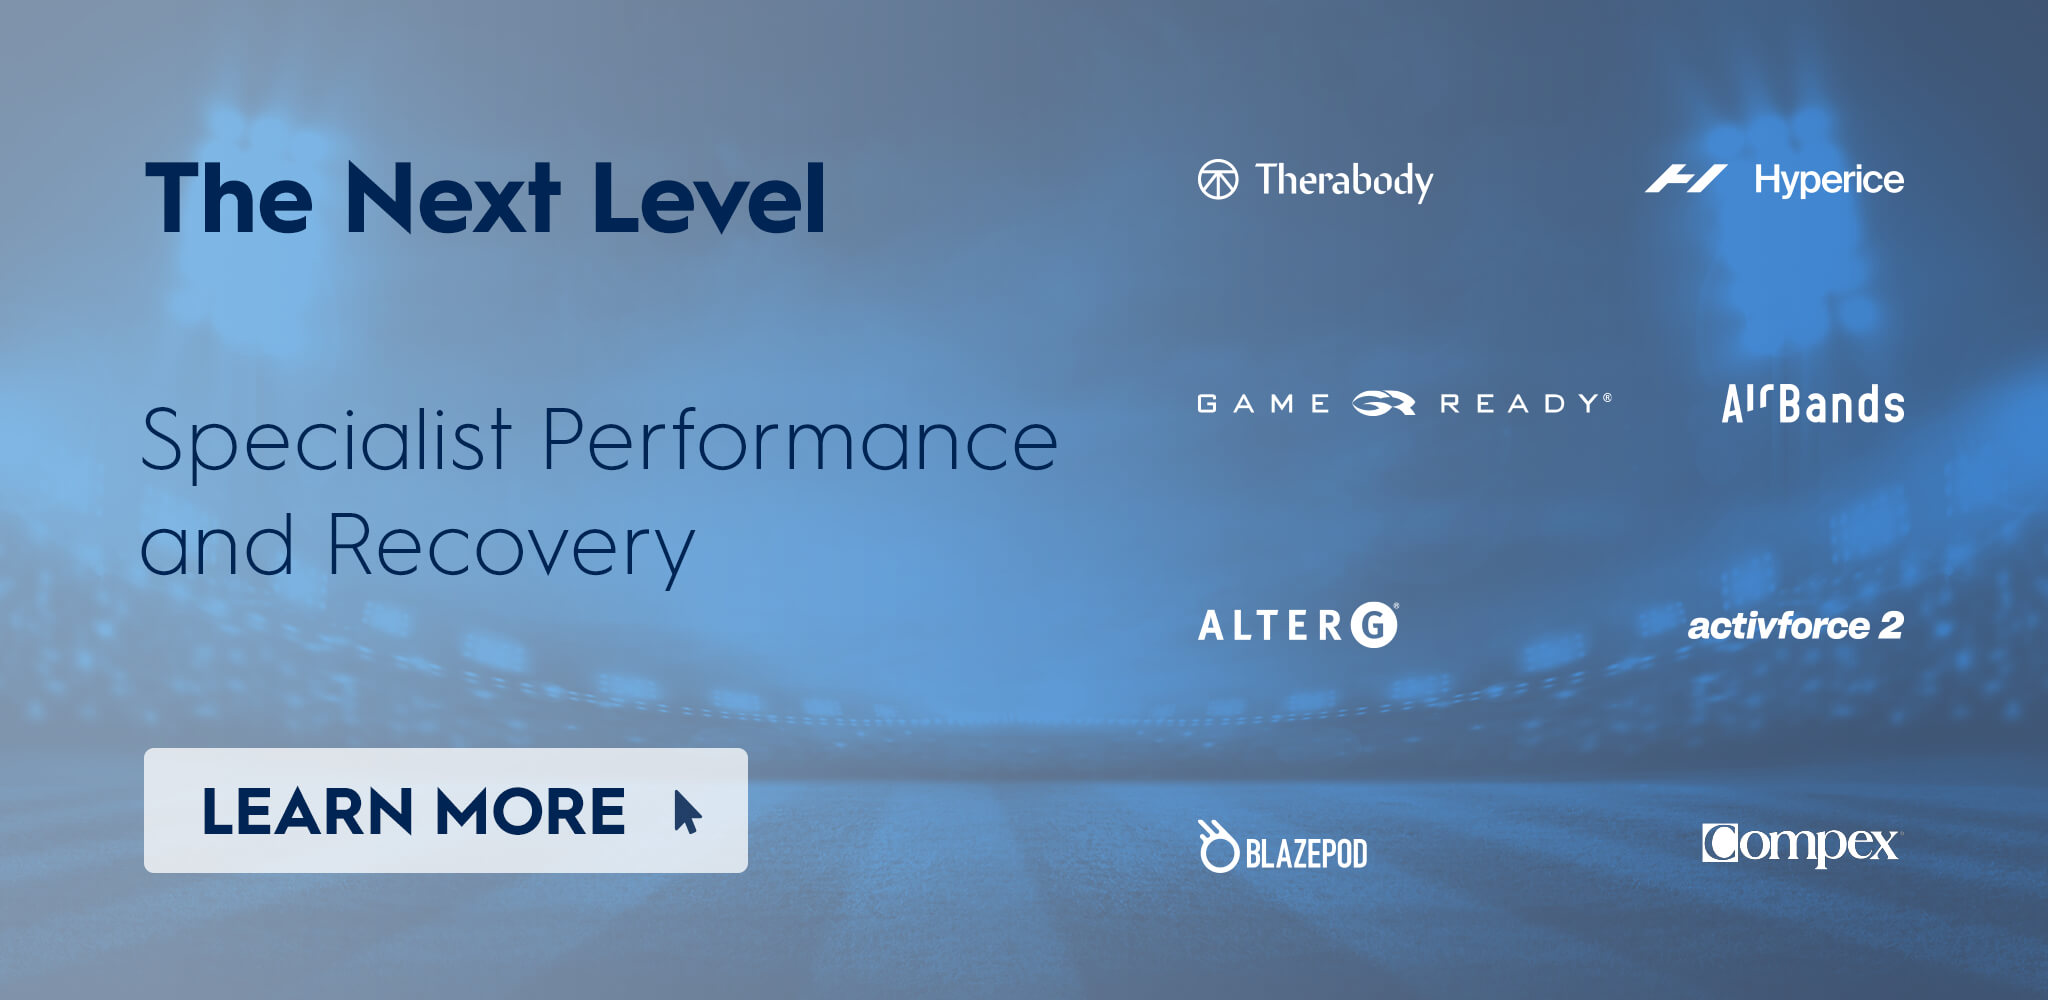 The next level - High Performance